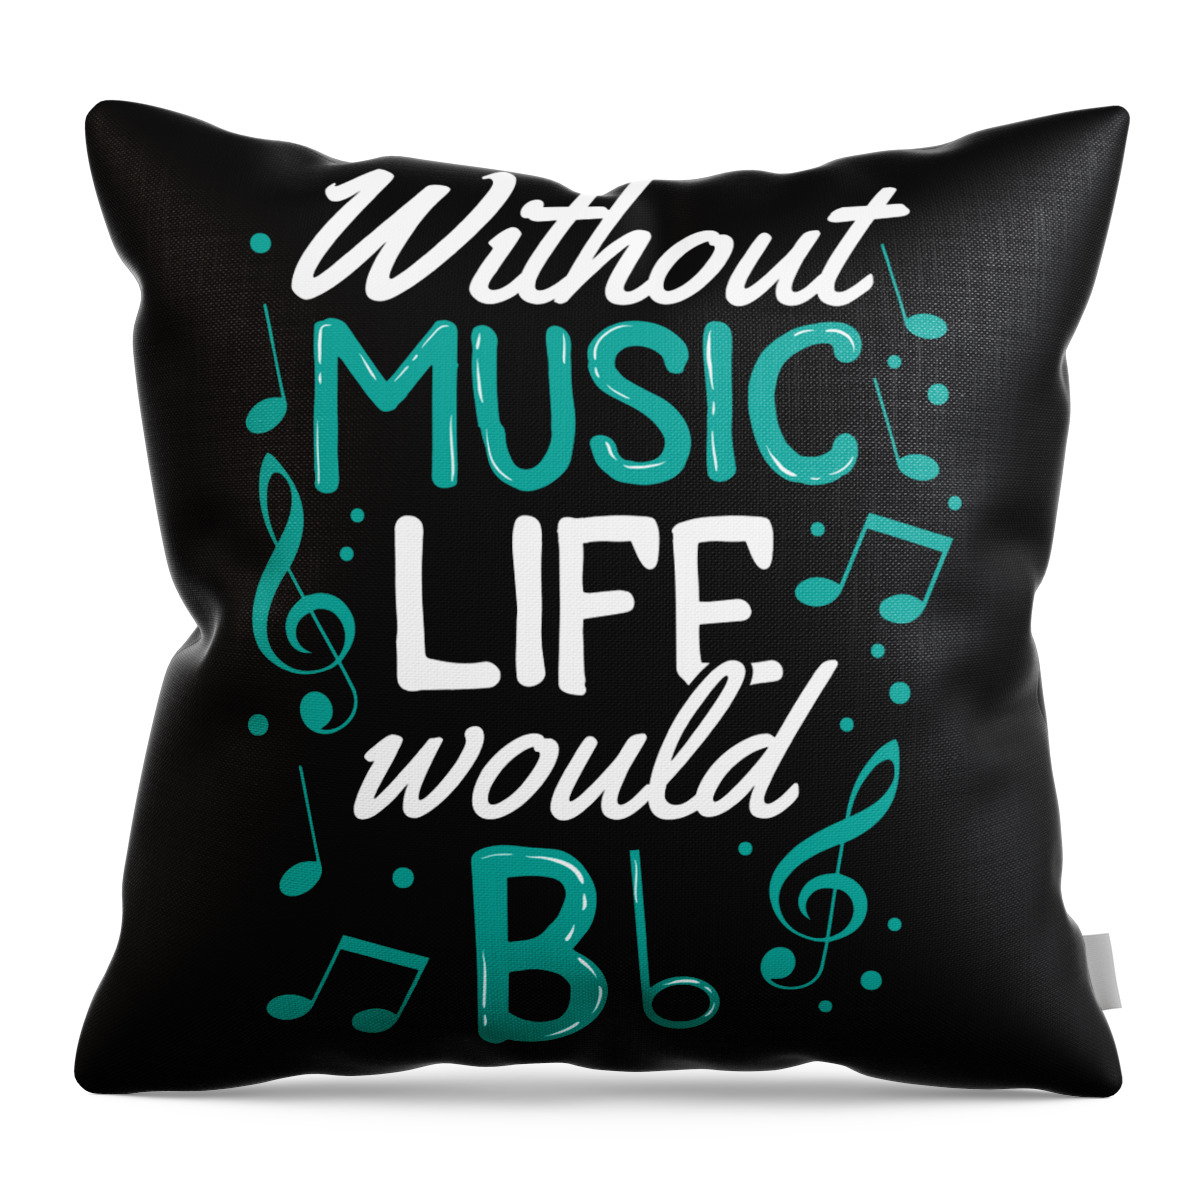 Without Music Life Would Be b Flat Musician Gift Digital Art by